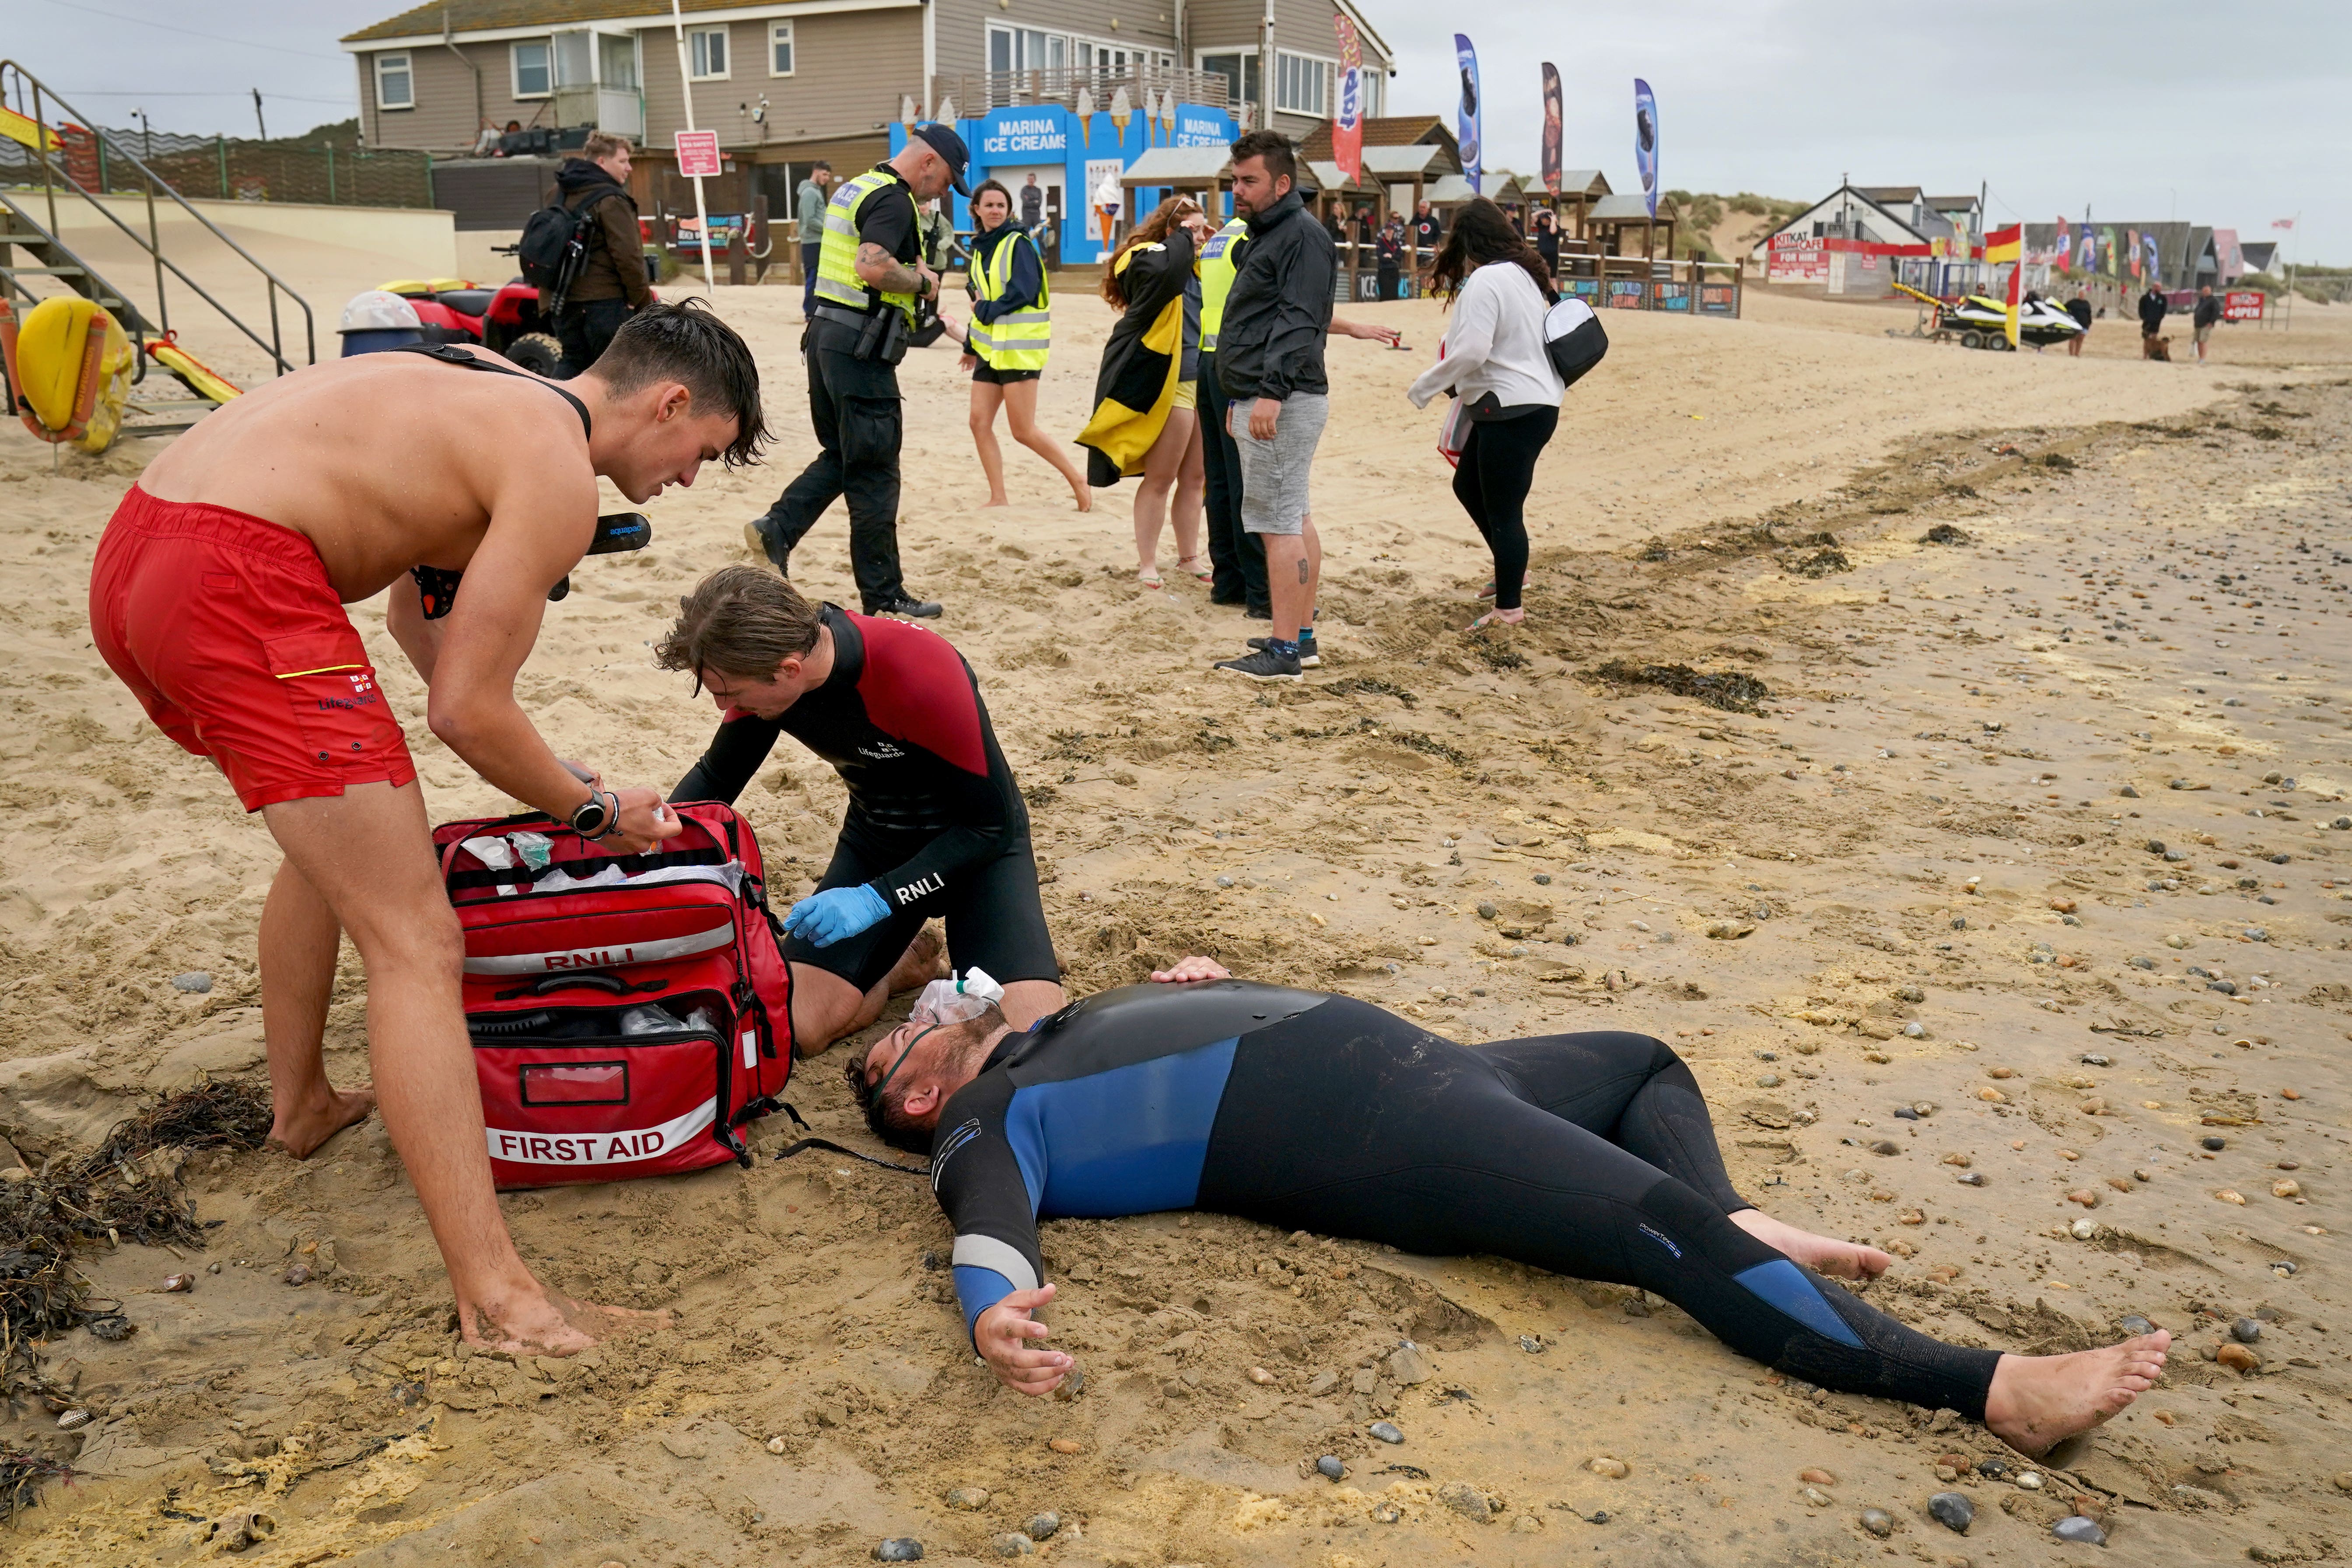 Lifeguards practise their skills on an actor during a multi-agency exercise to test emergency response at Camber Sands (Gareth Fuller/PA)